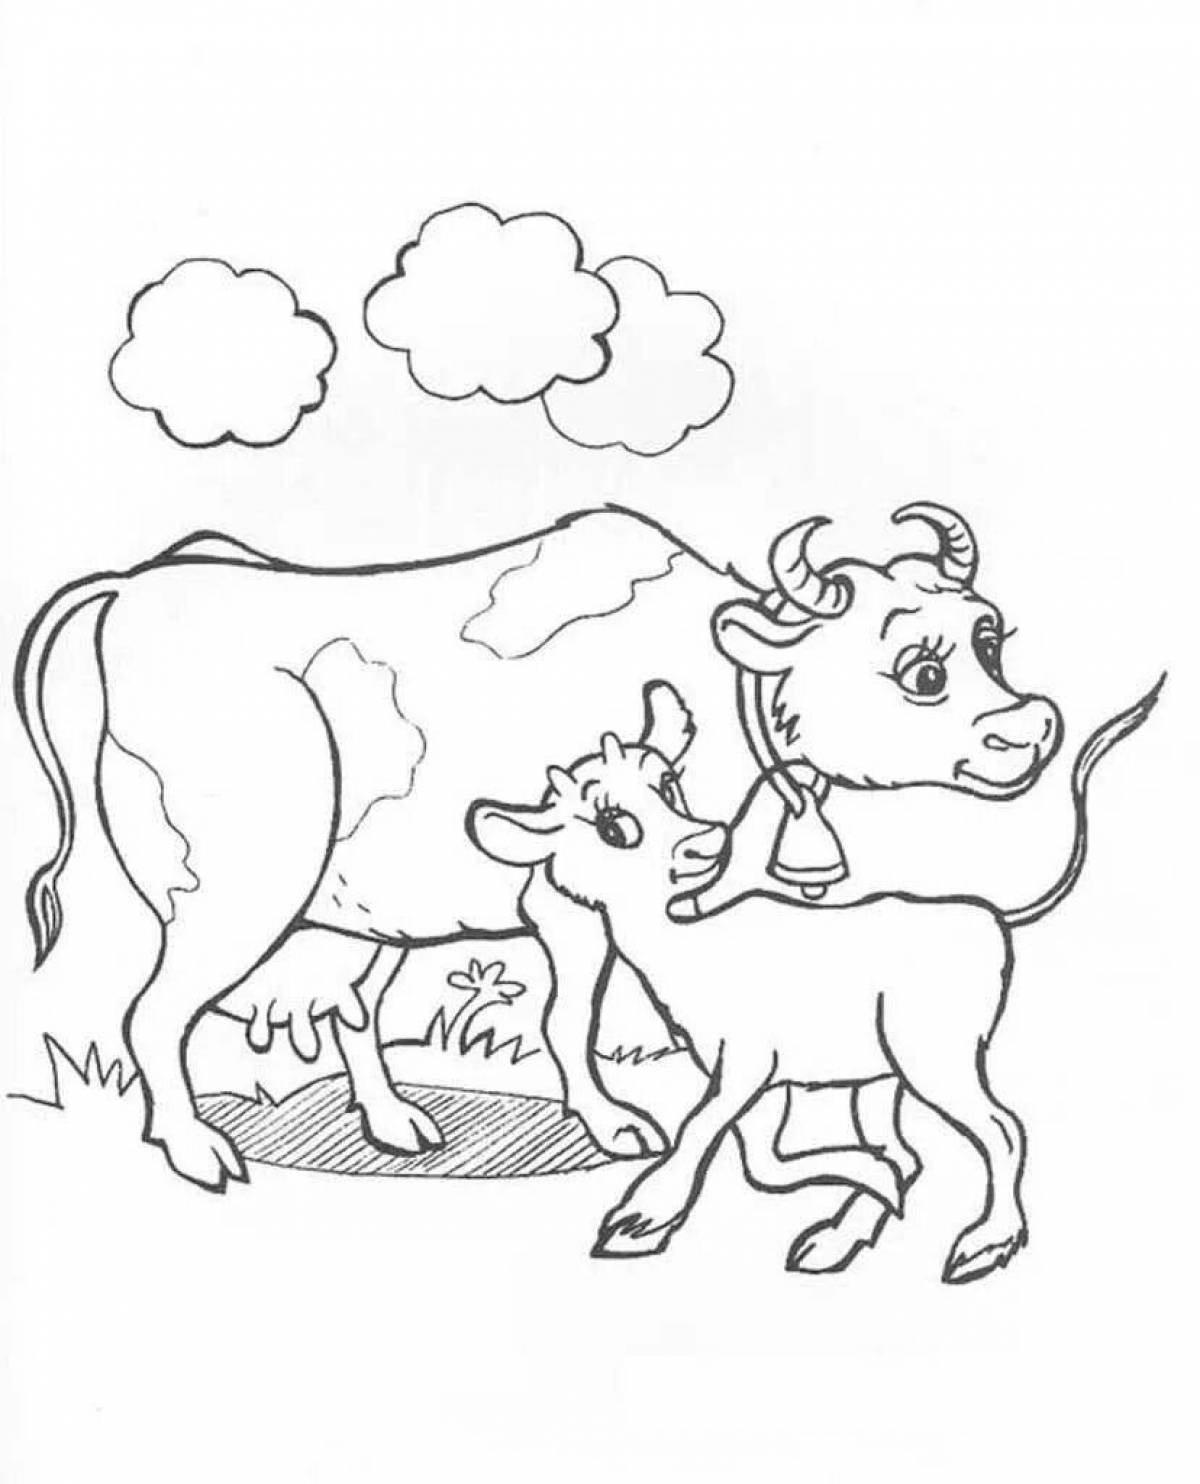 Creative calf coloring for kids